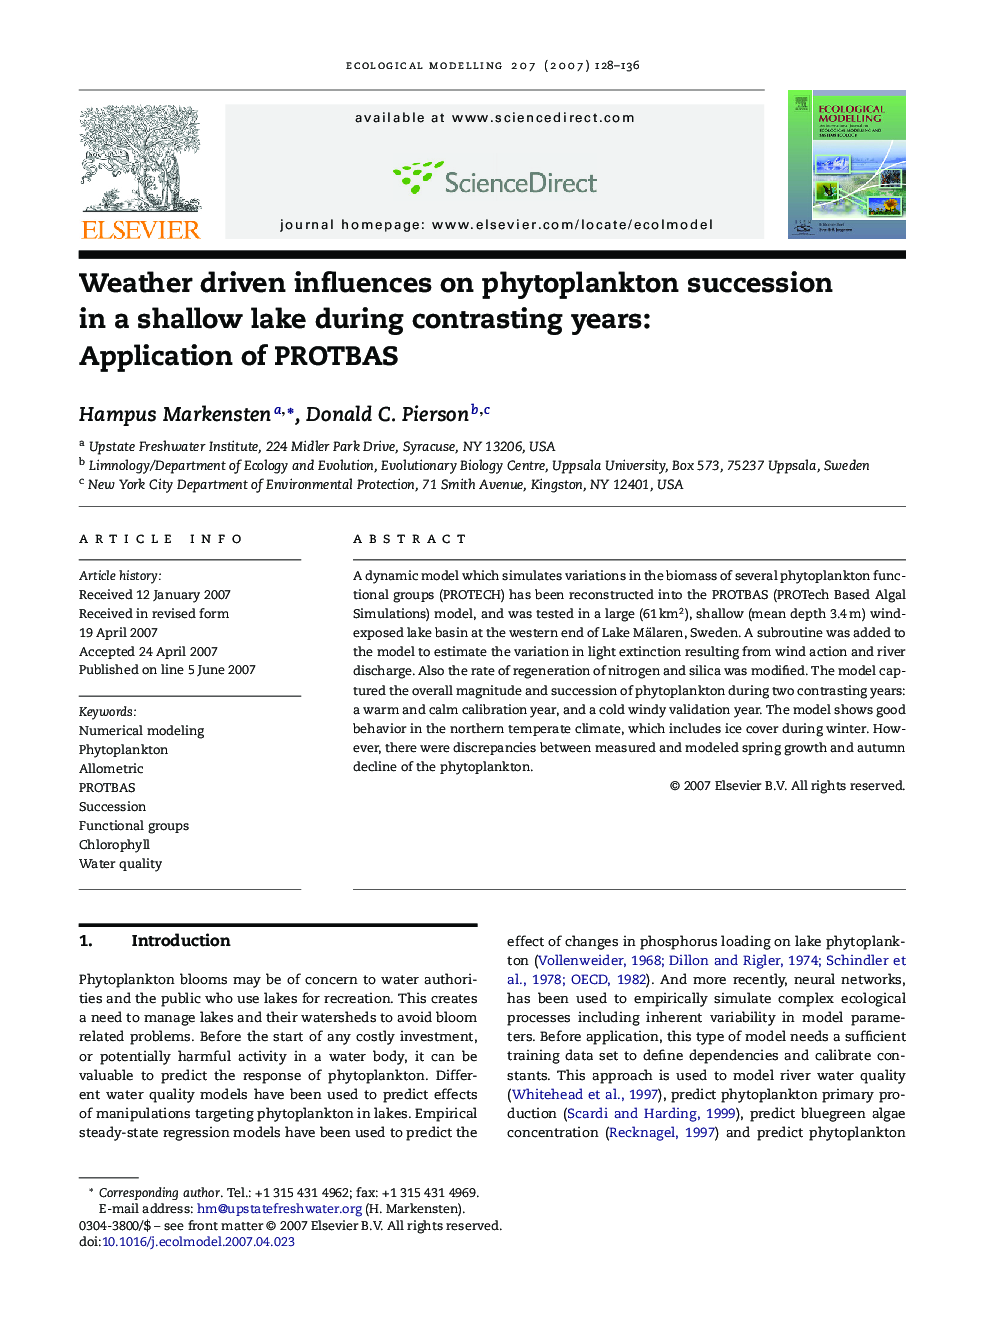 Weather driven influences on phytoplankton succession in a shallow lake during contrasting years: Application of PROTBAS